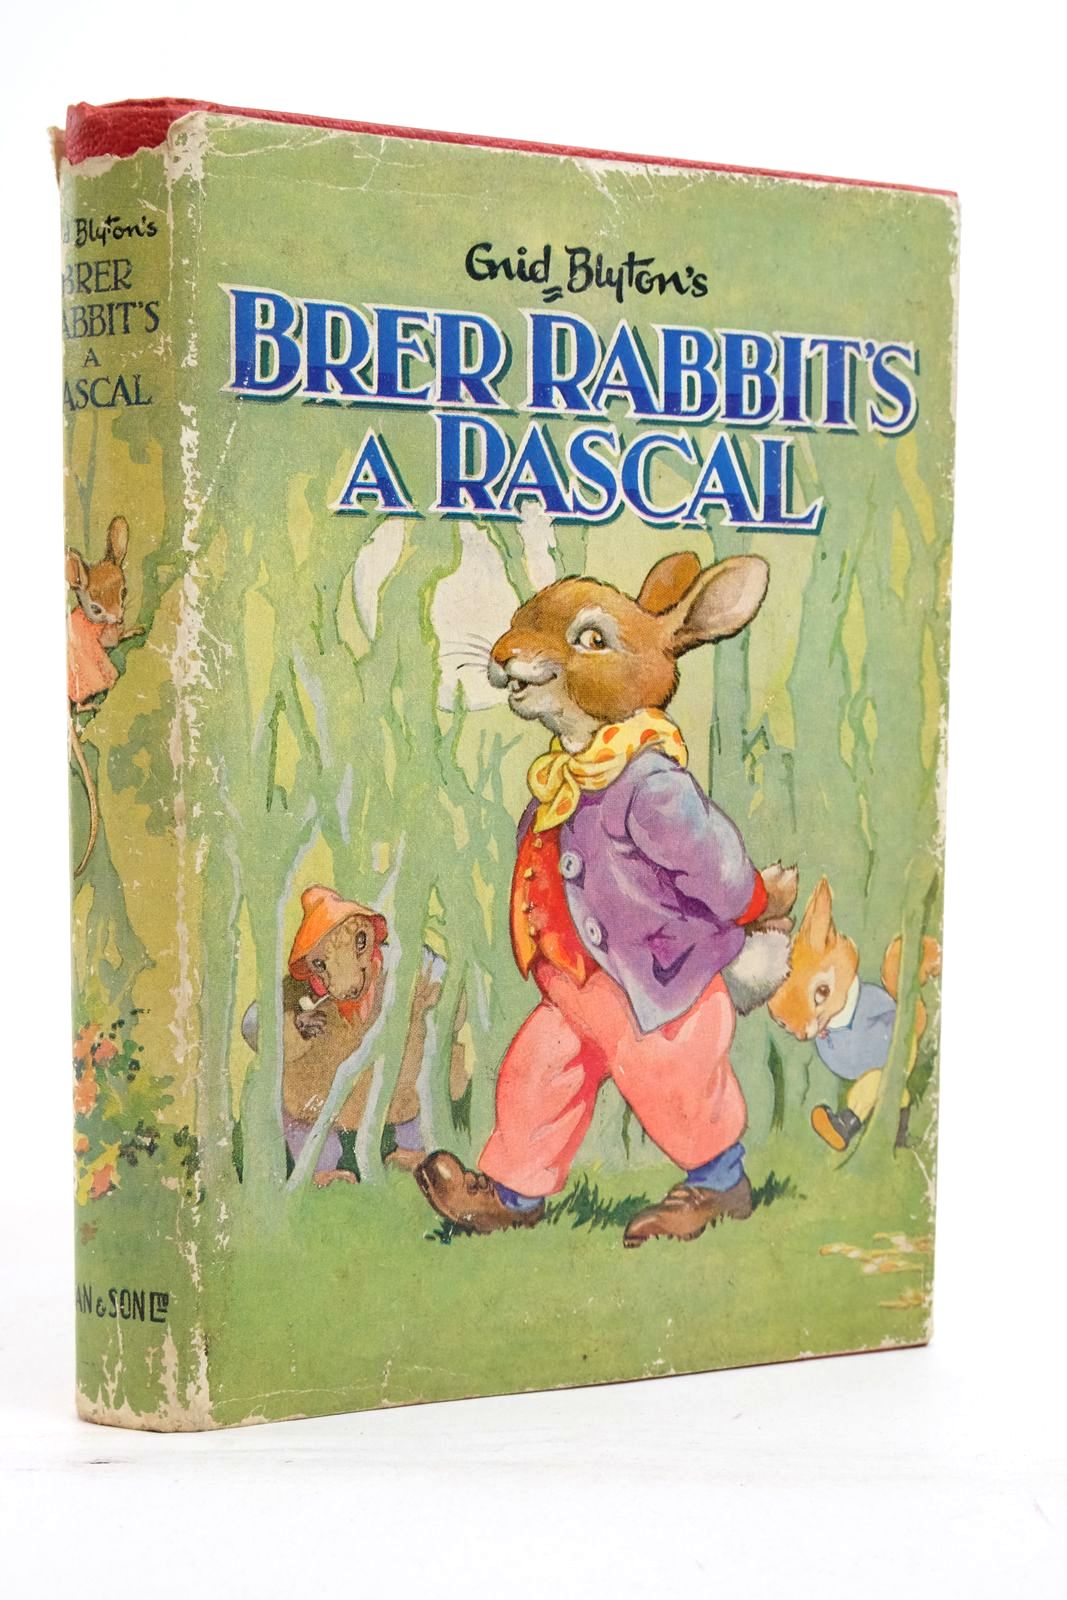 Photo of BRER RABBIT'S A RASCAL written by Blyton, Enid illustrated by Lodge, Grace published by Dean &amp; Son Ltd. (STOCK CODE: 2137955)  for sale by Stella & Rose's Books